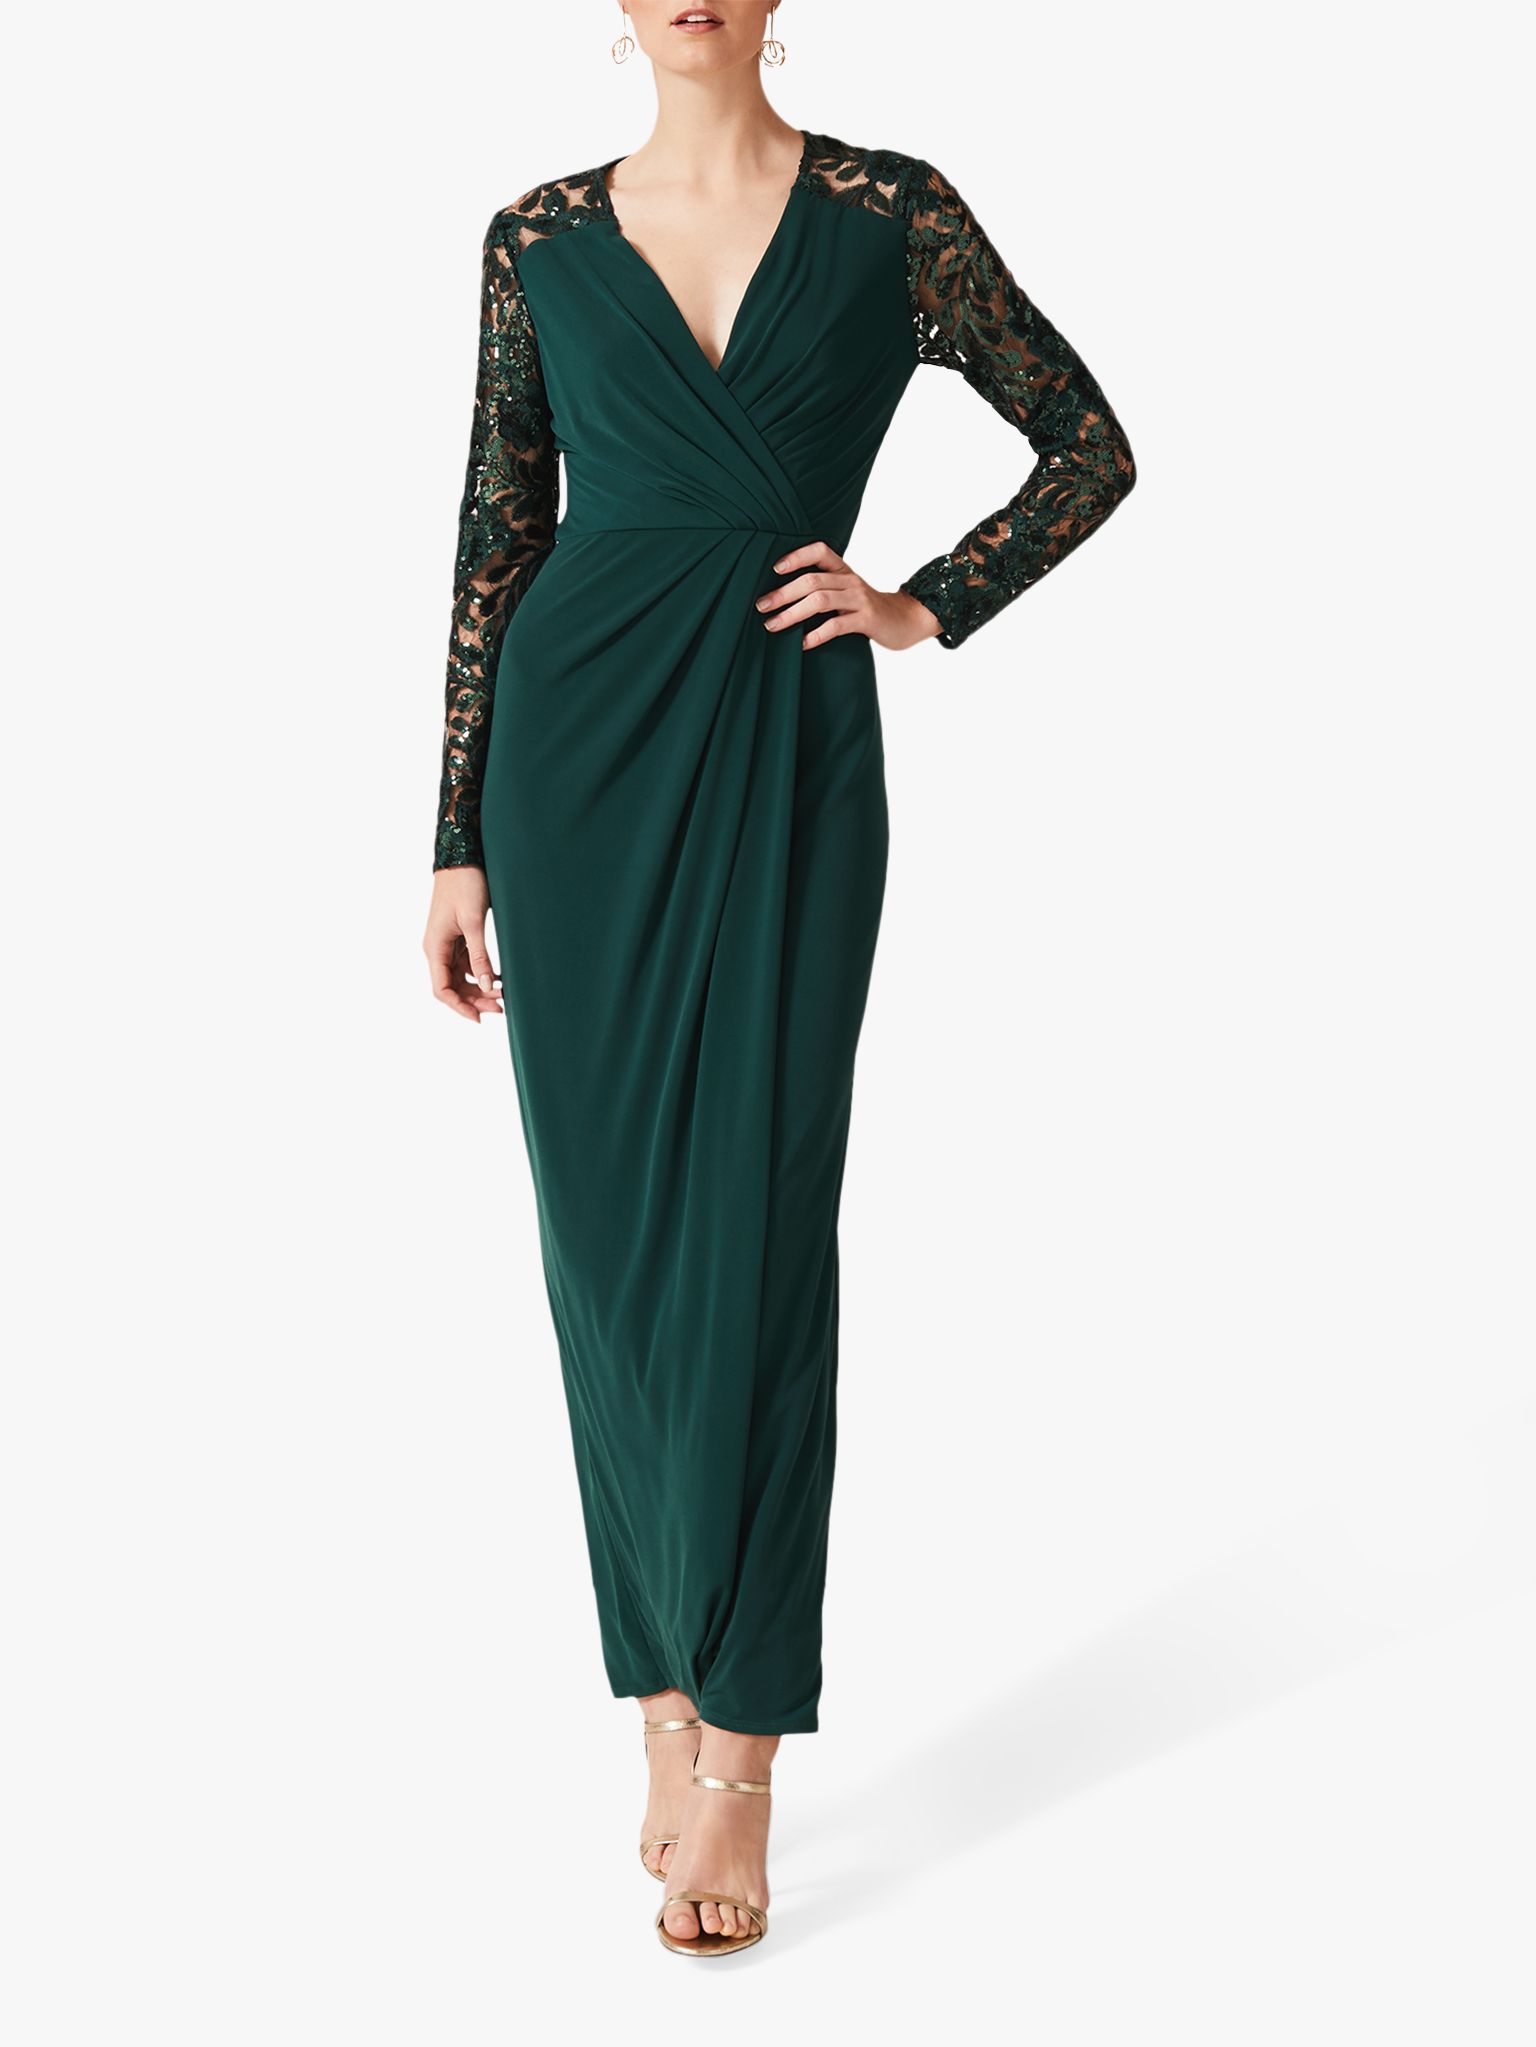 phase eight green dress sale